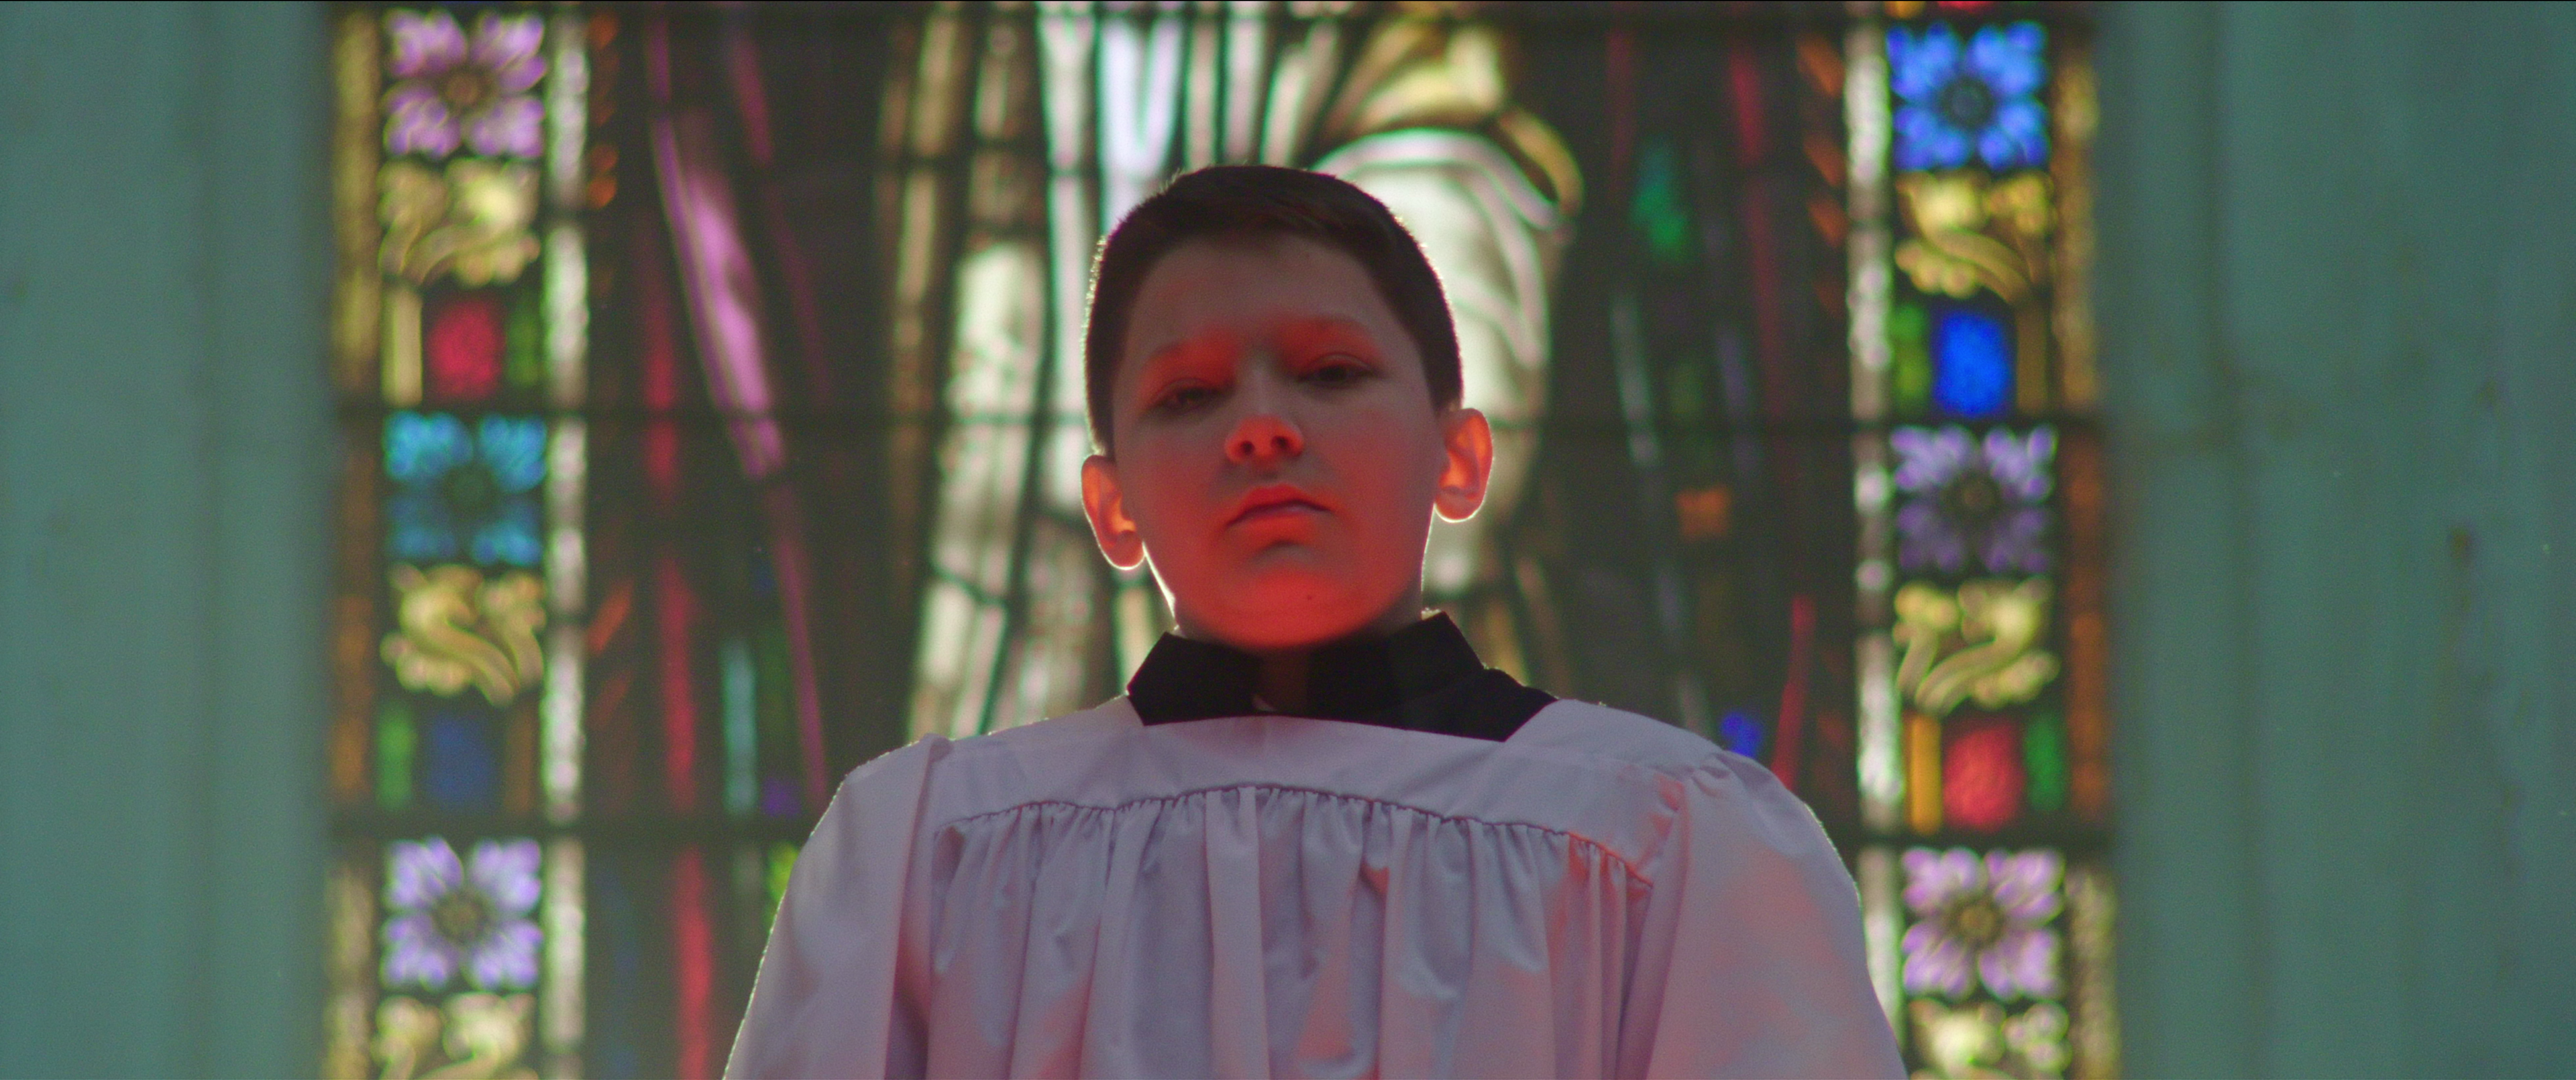 A boy in an altar boy’s robe stands backlit by a stained glass window.